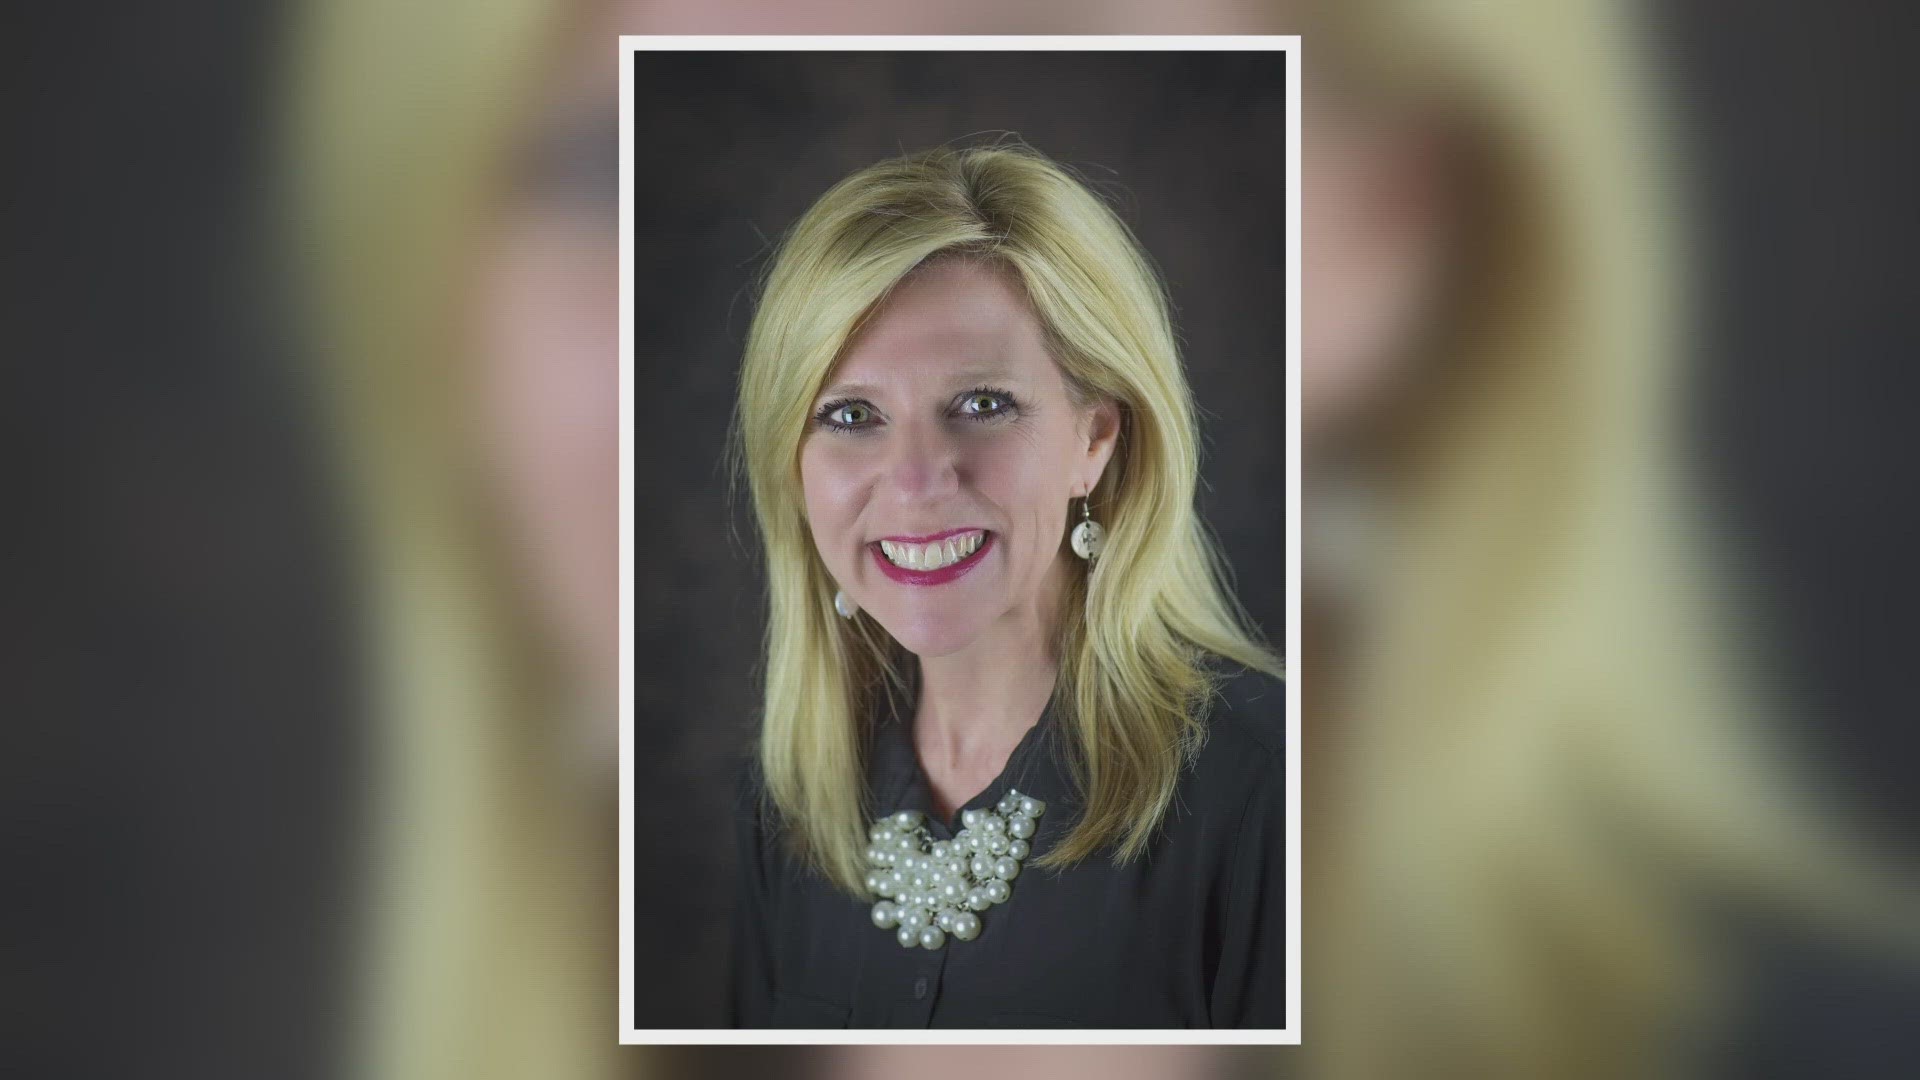 After a mandatory waiting period, Tracy Johnson will become the first female superintendent in the district's 112-year history.